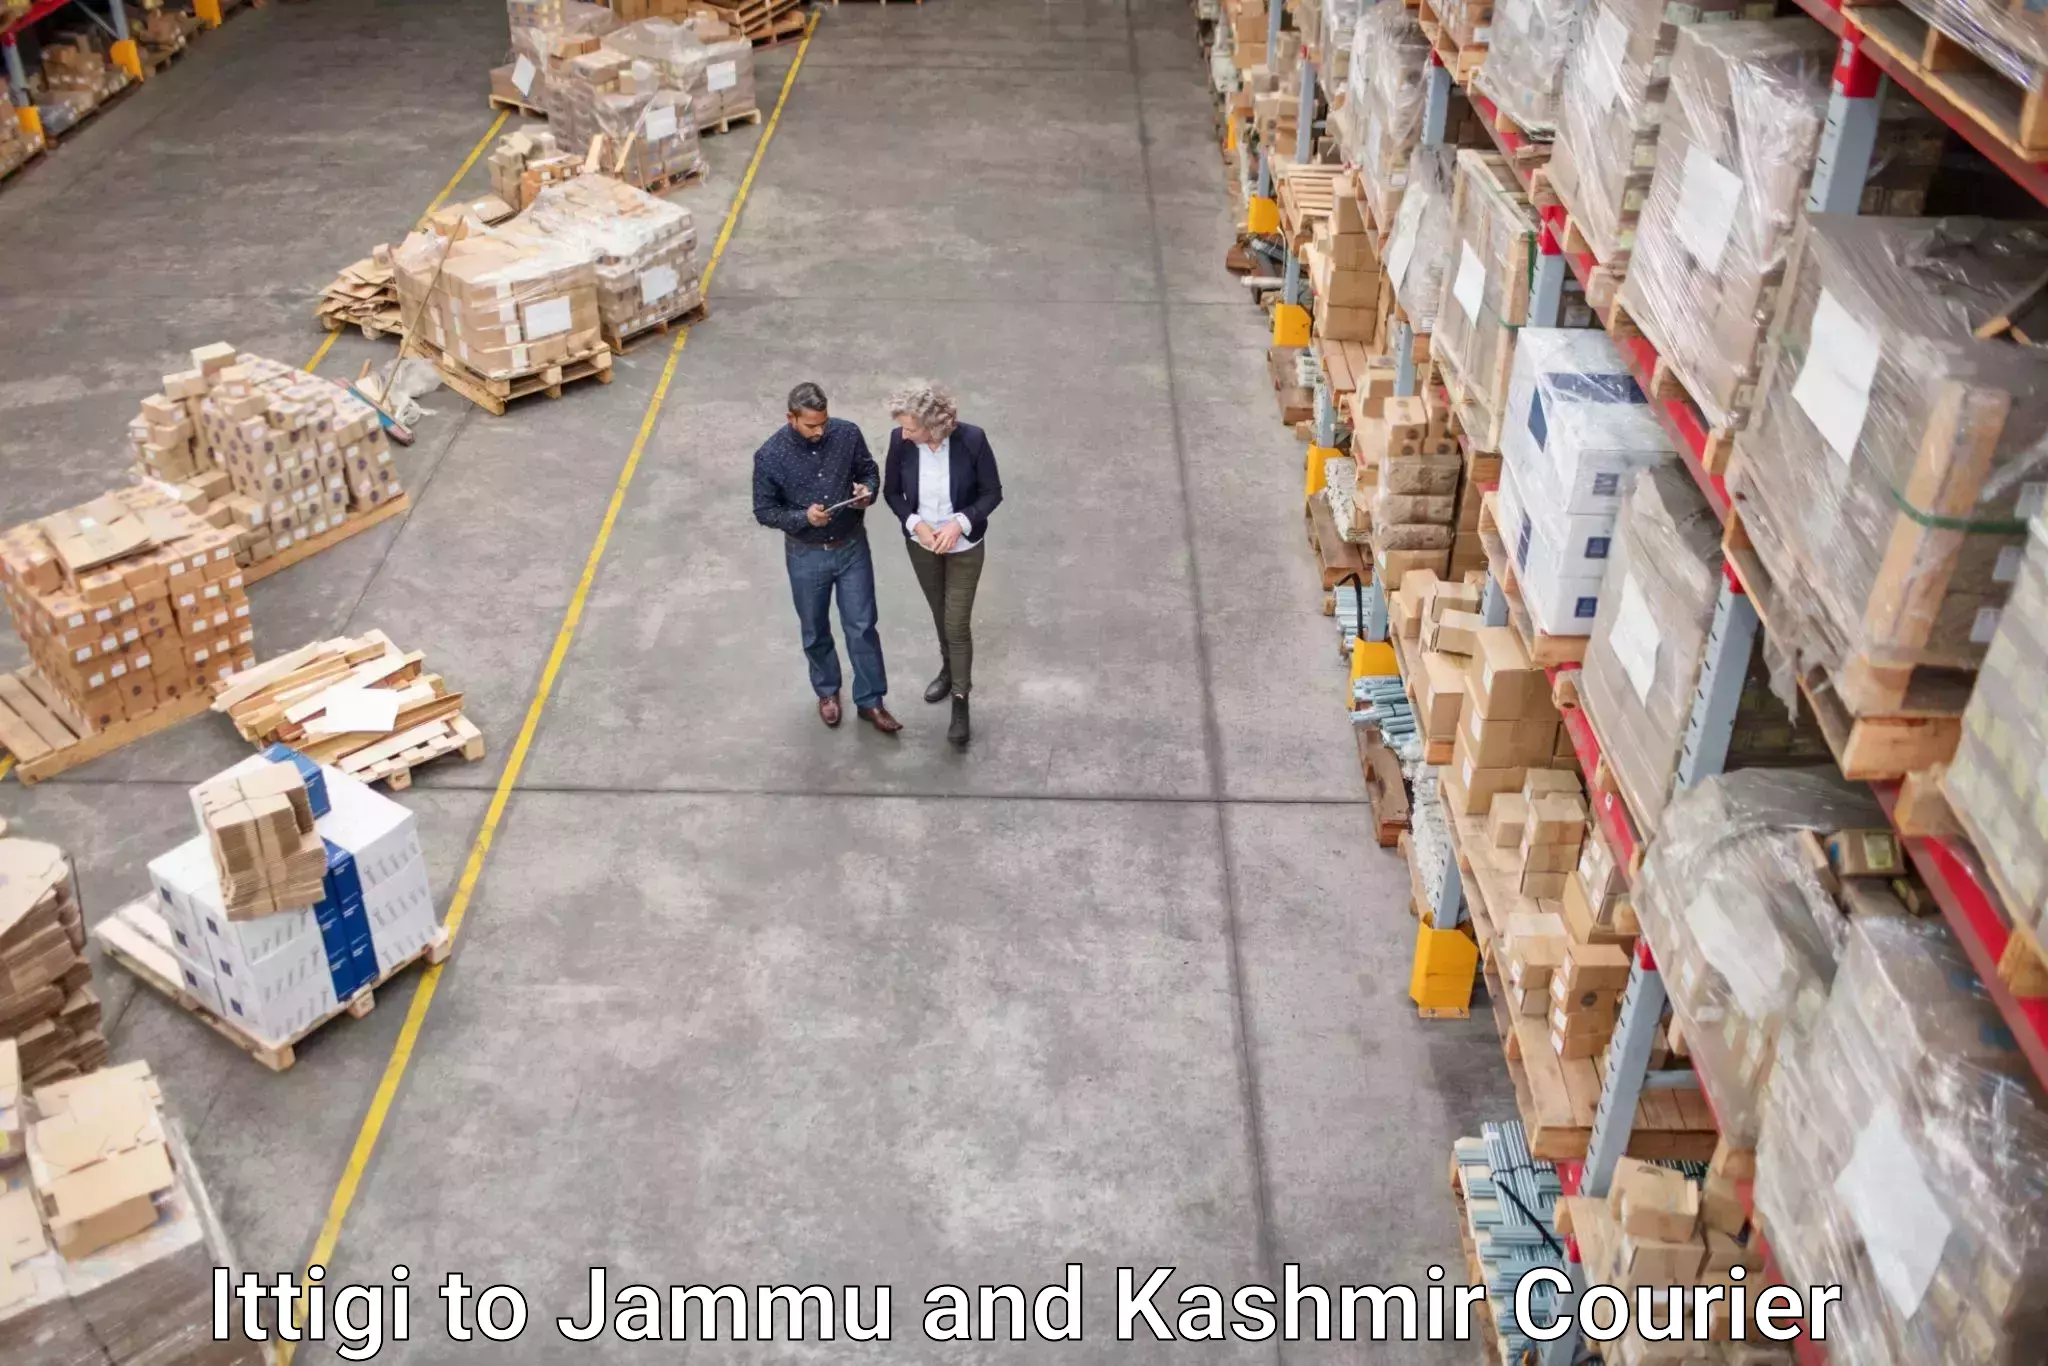 Express delivery solutions Ittigi to Pulwama